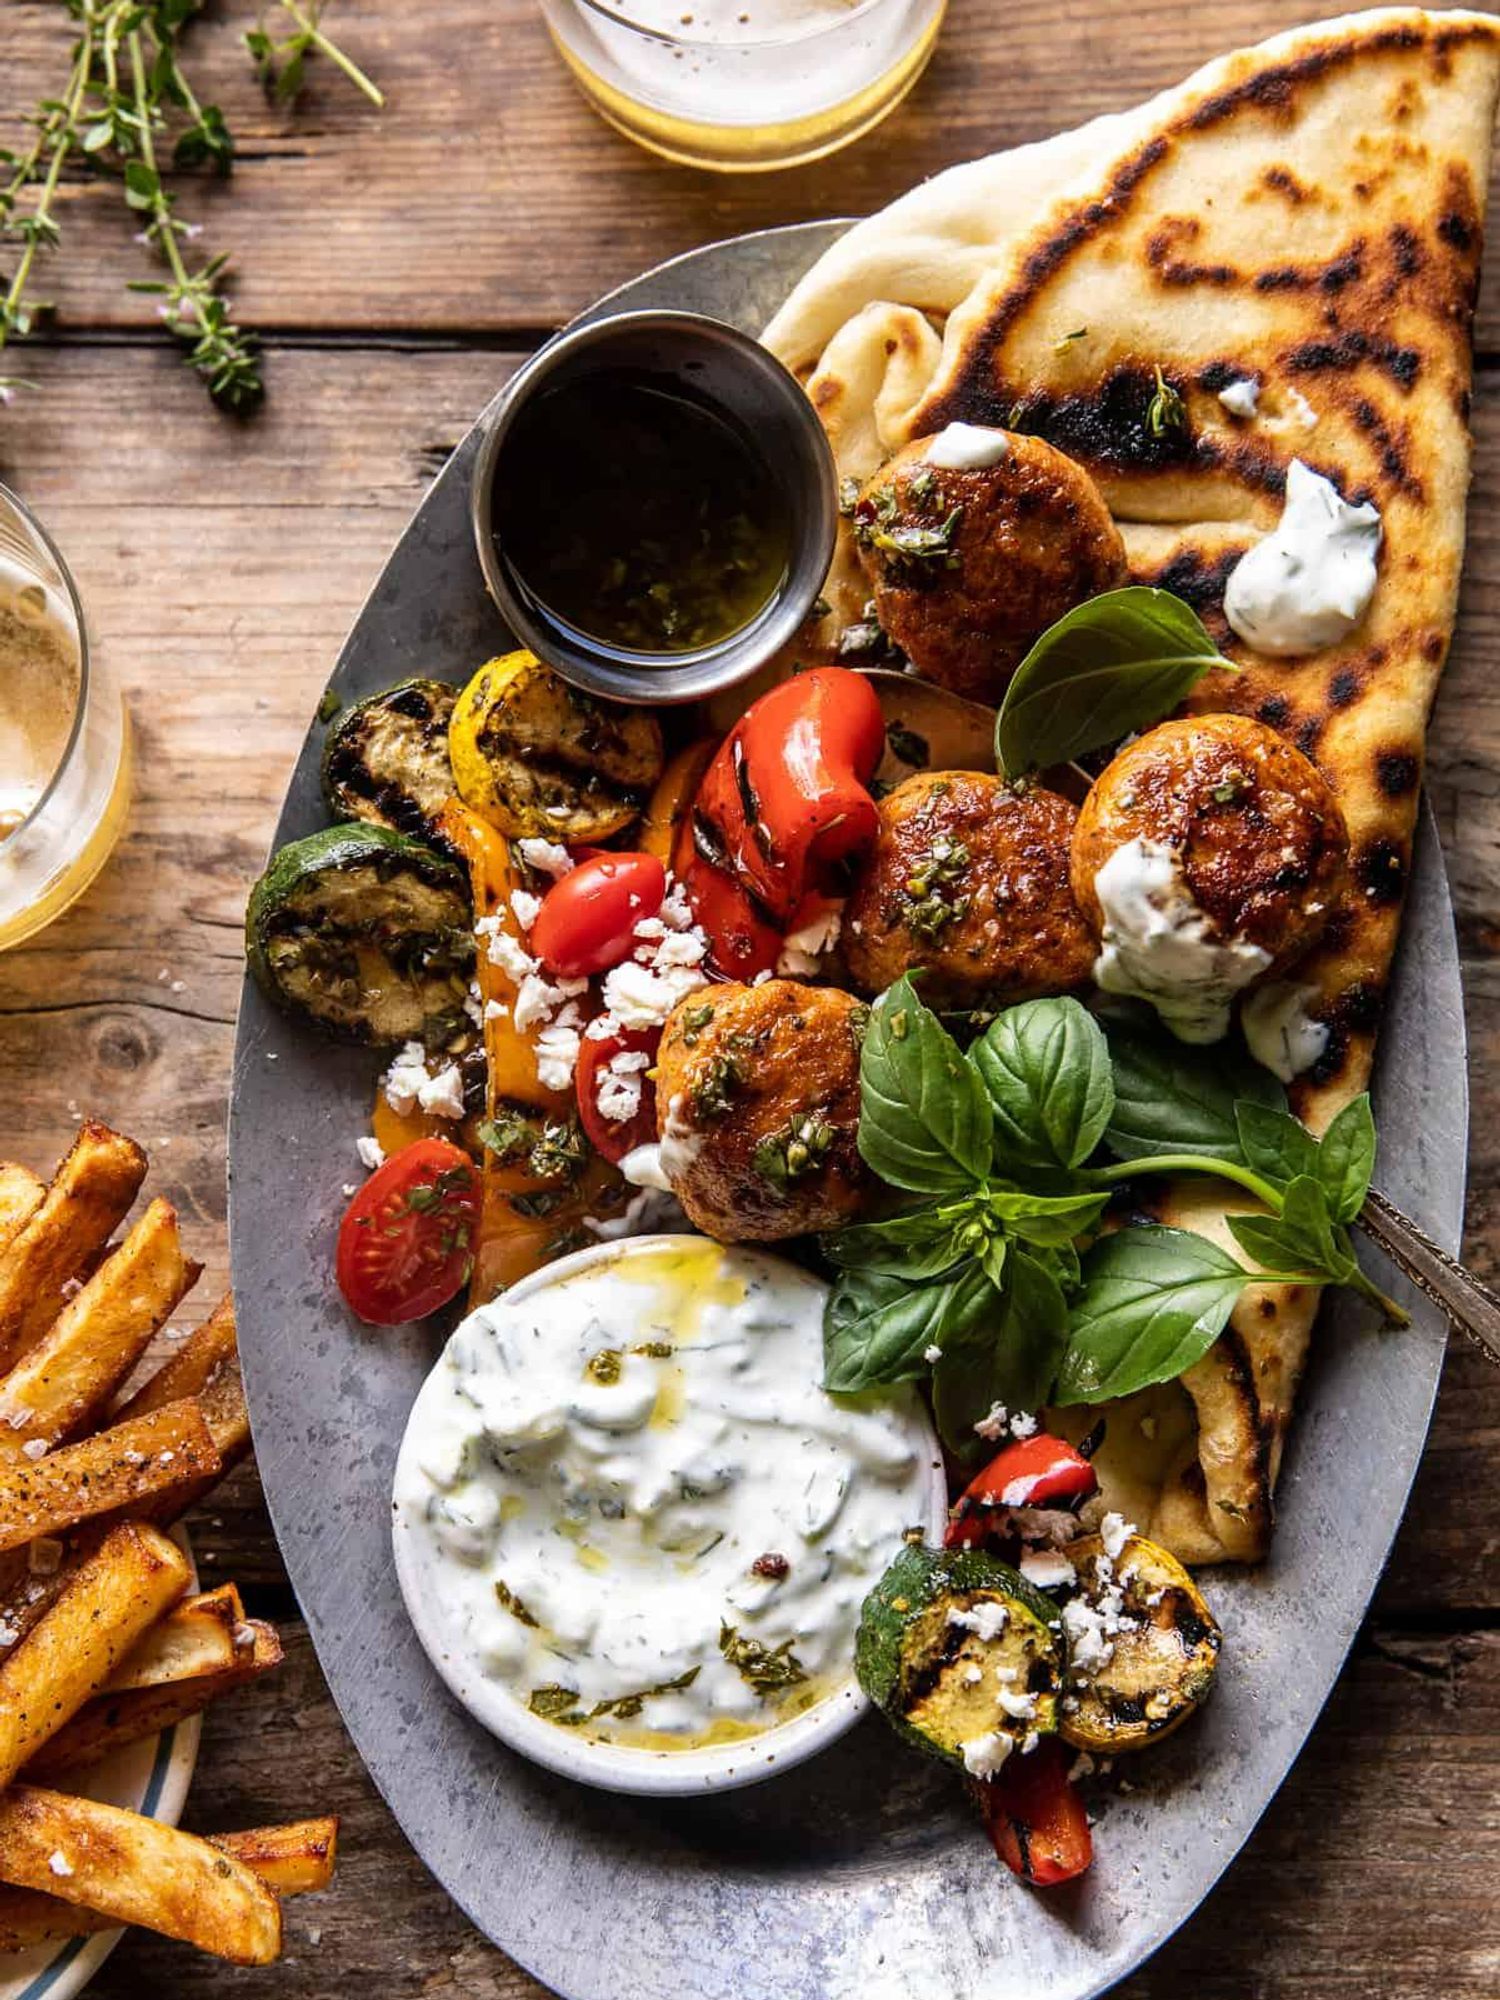 Spicy Oregano Meatballs with Grilled Vegetables and Tzatziki